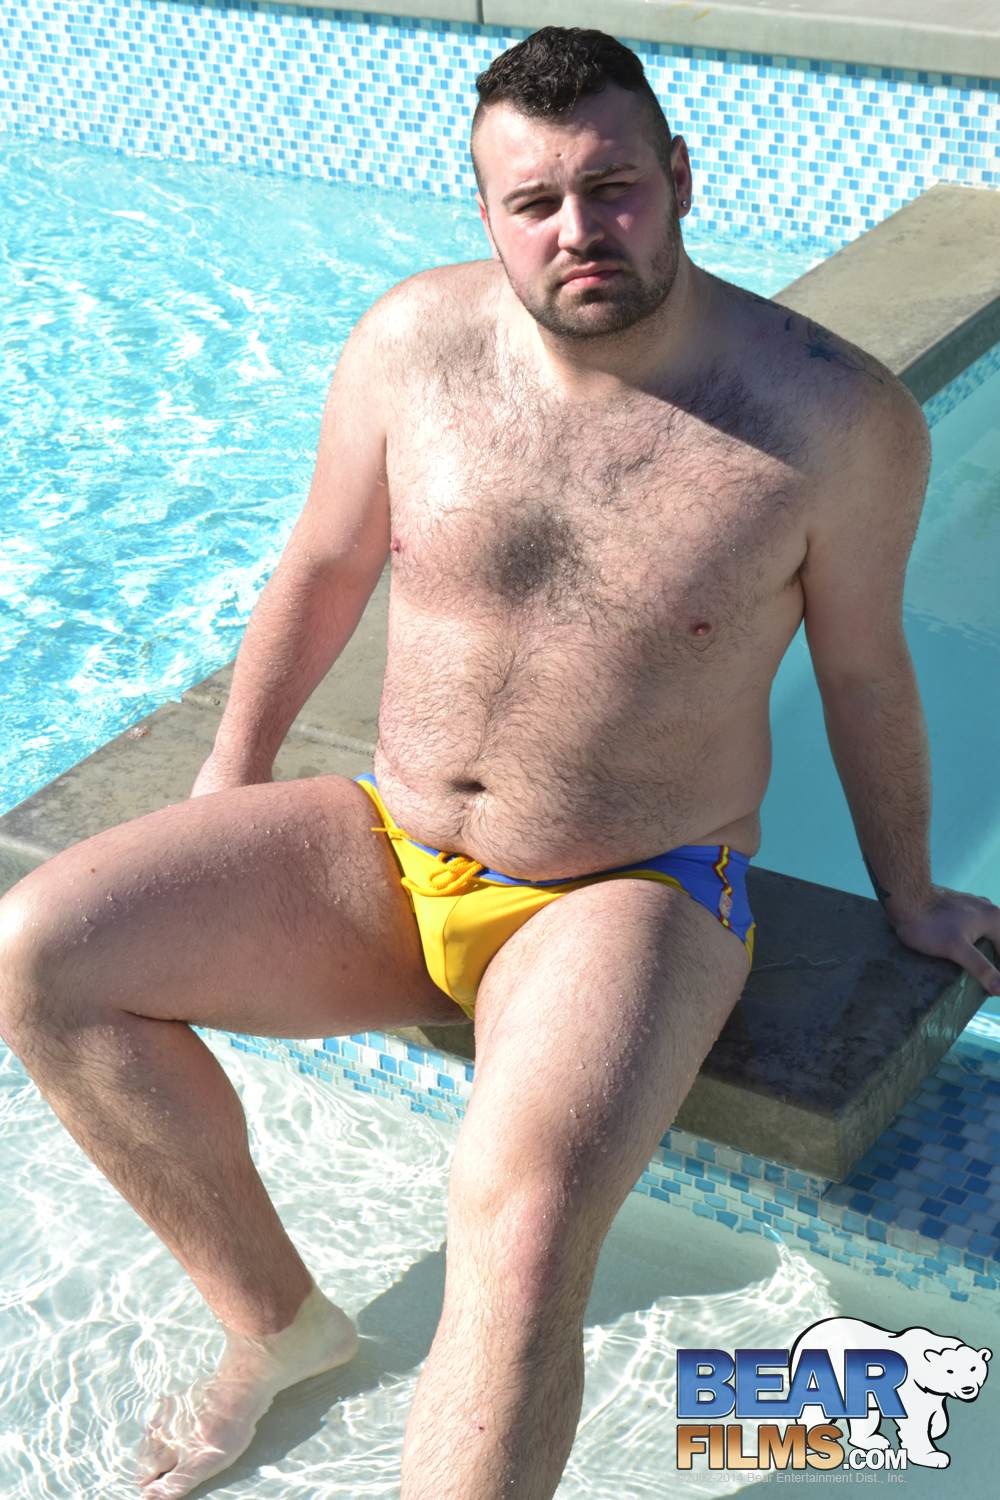 rex blue poses in a speedo for gay porn site bear films